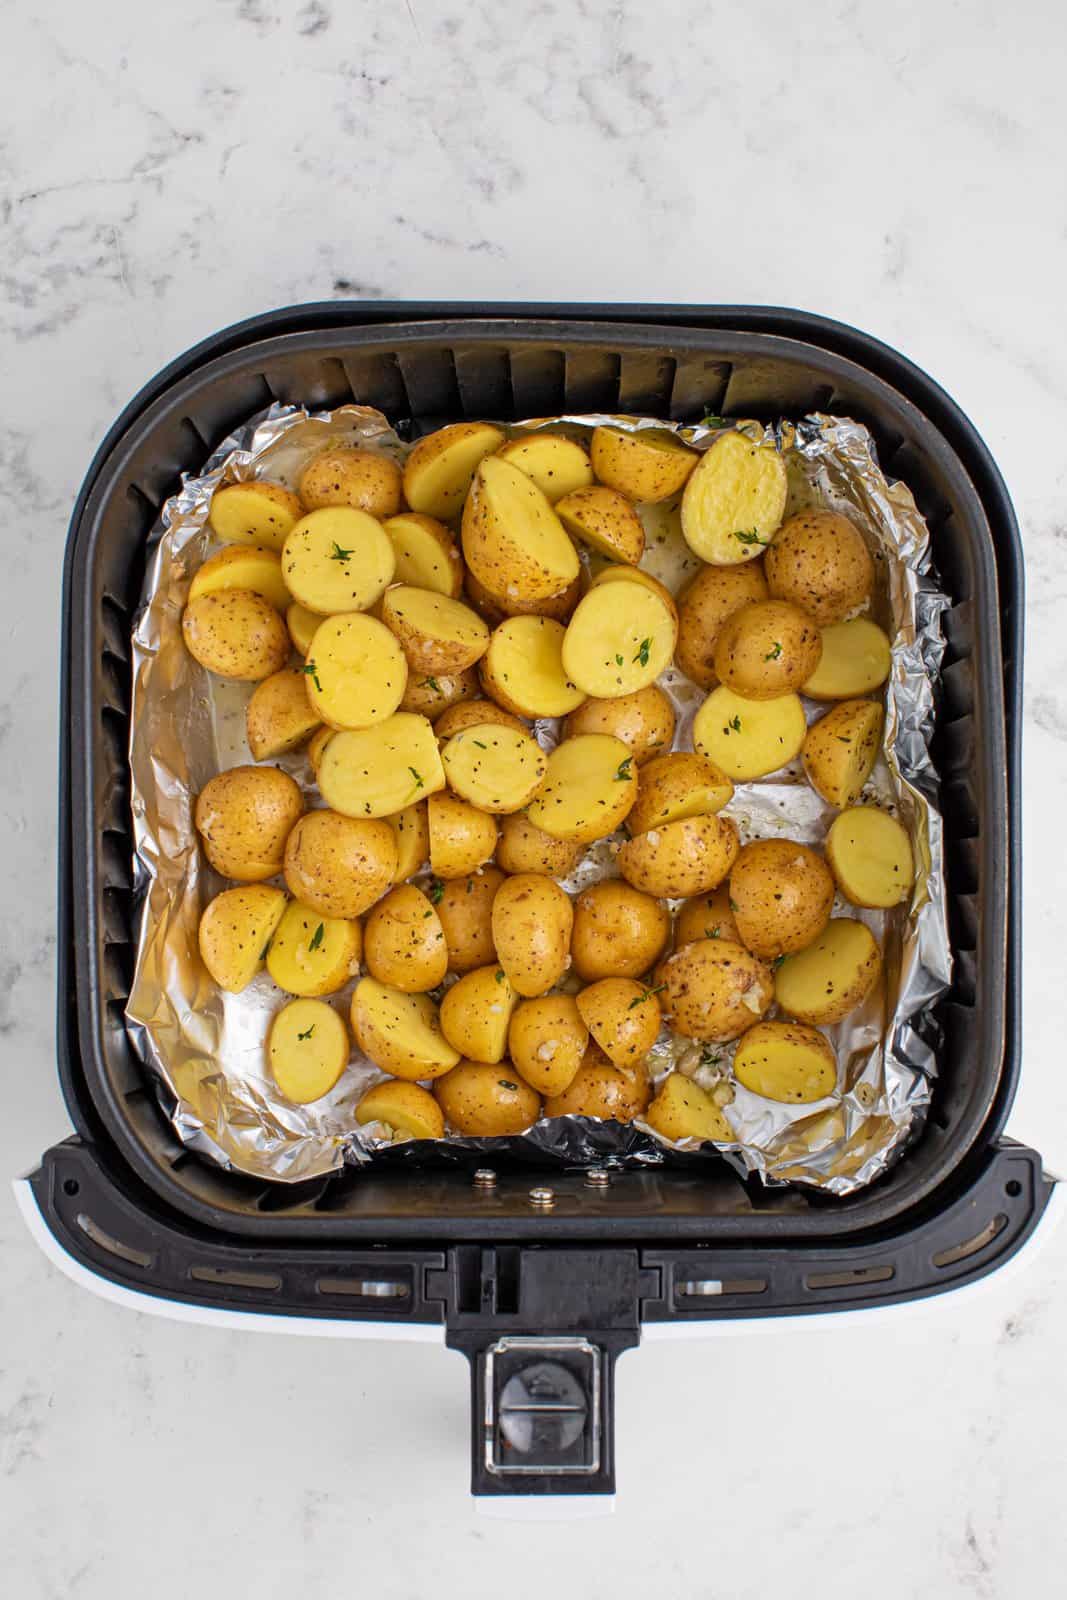 Seasoned potatoes in an Air Fryer basket lined with foil.